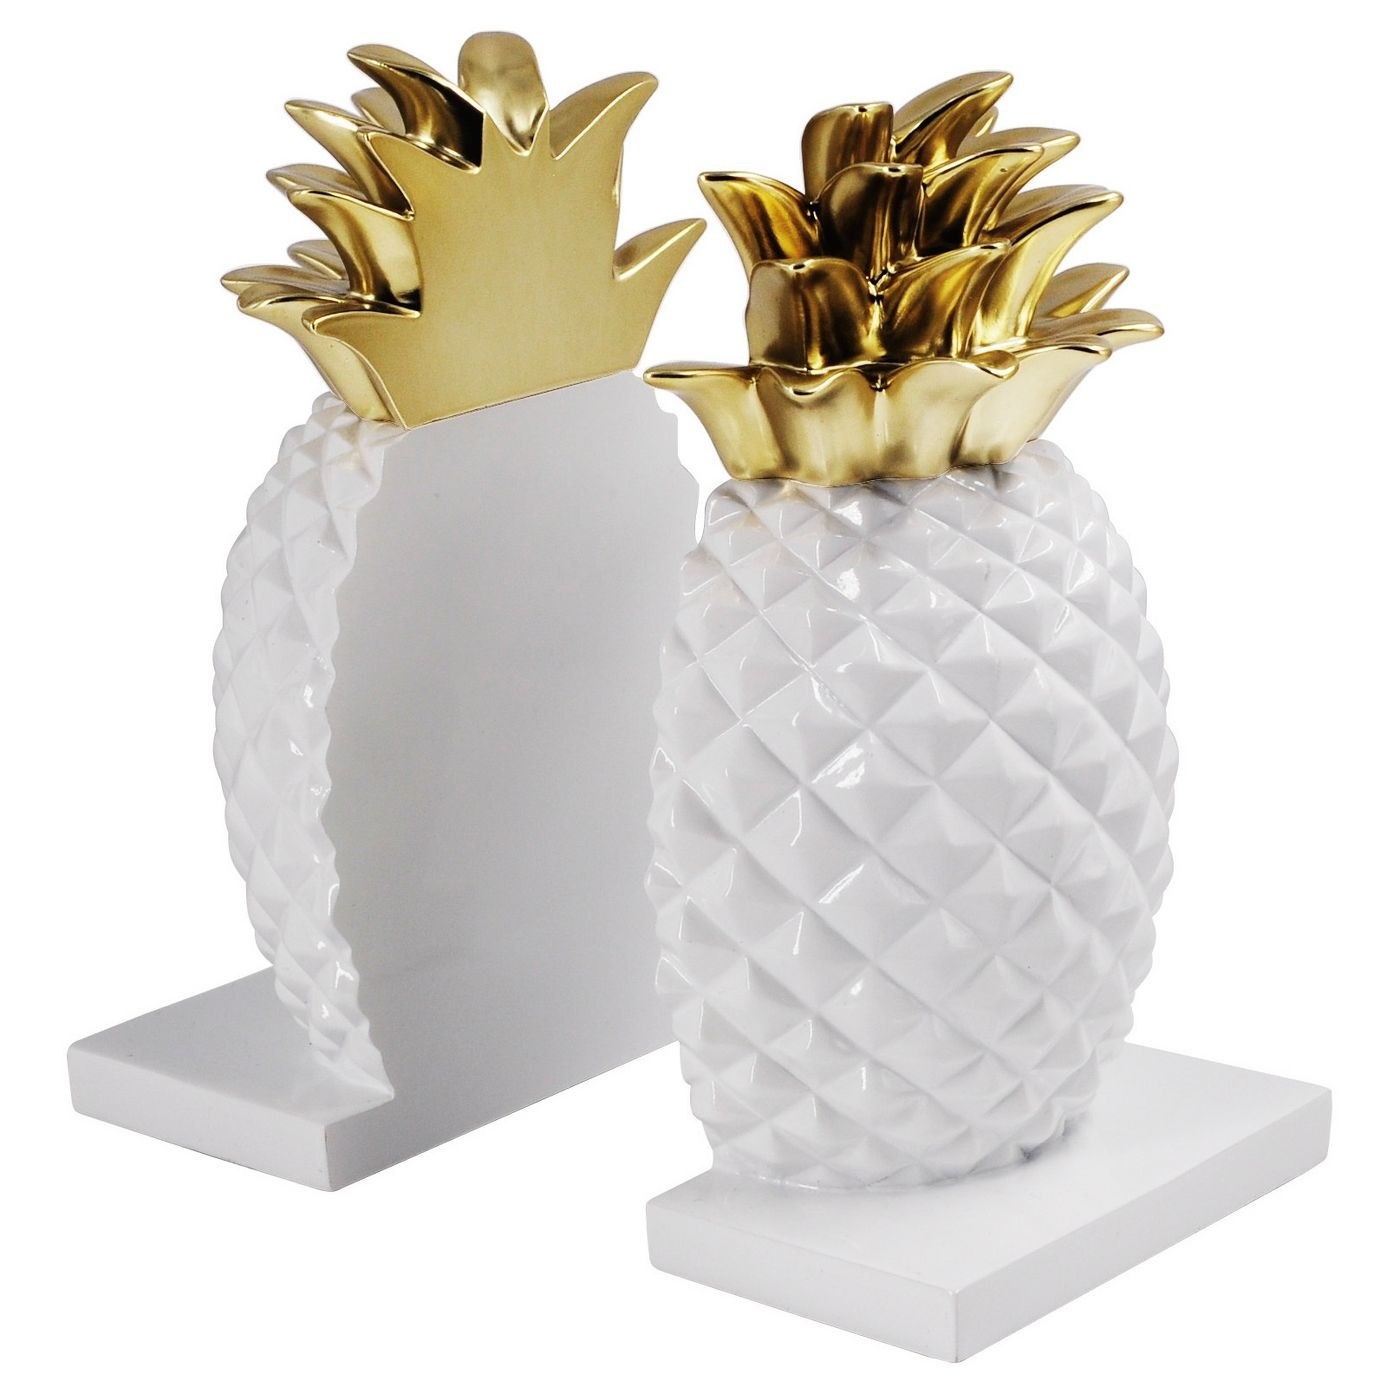 The two books ends, each of which resembles half a pineapple, with a white, porcelain-look body and a gold crown, each mounted on a rectangular white base 